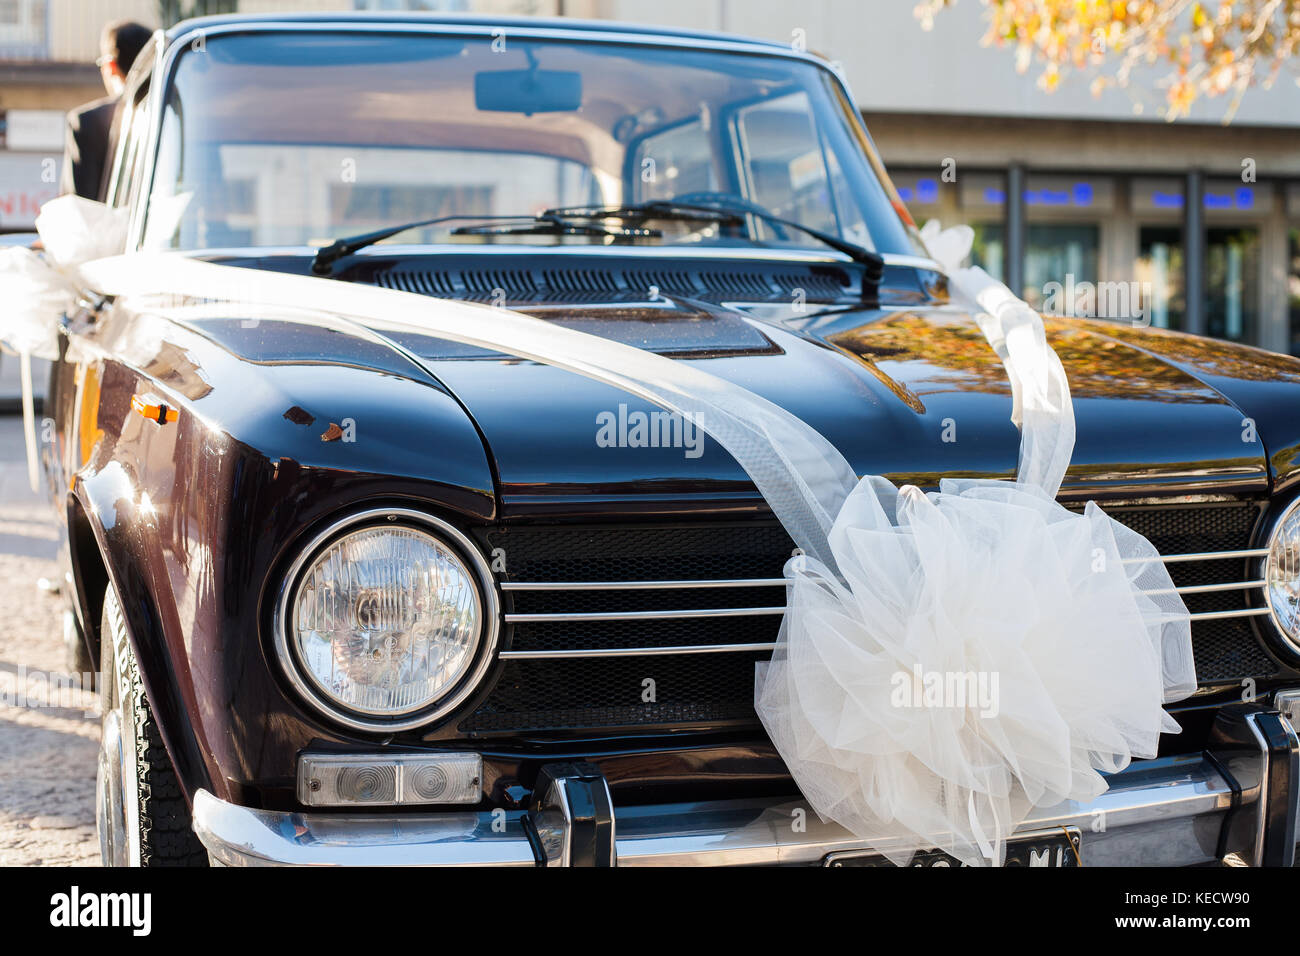 Vintage luxury car ready for wedding day, with clean body and a white ribbon representing the bride's car. Stock Photo